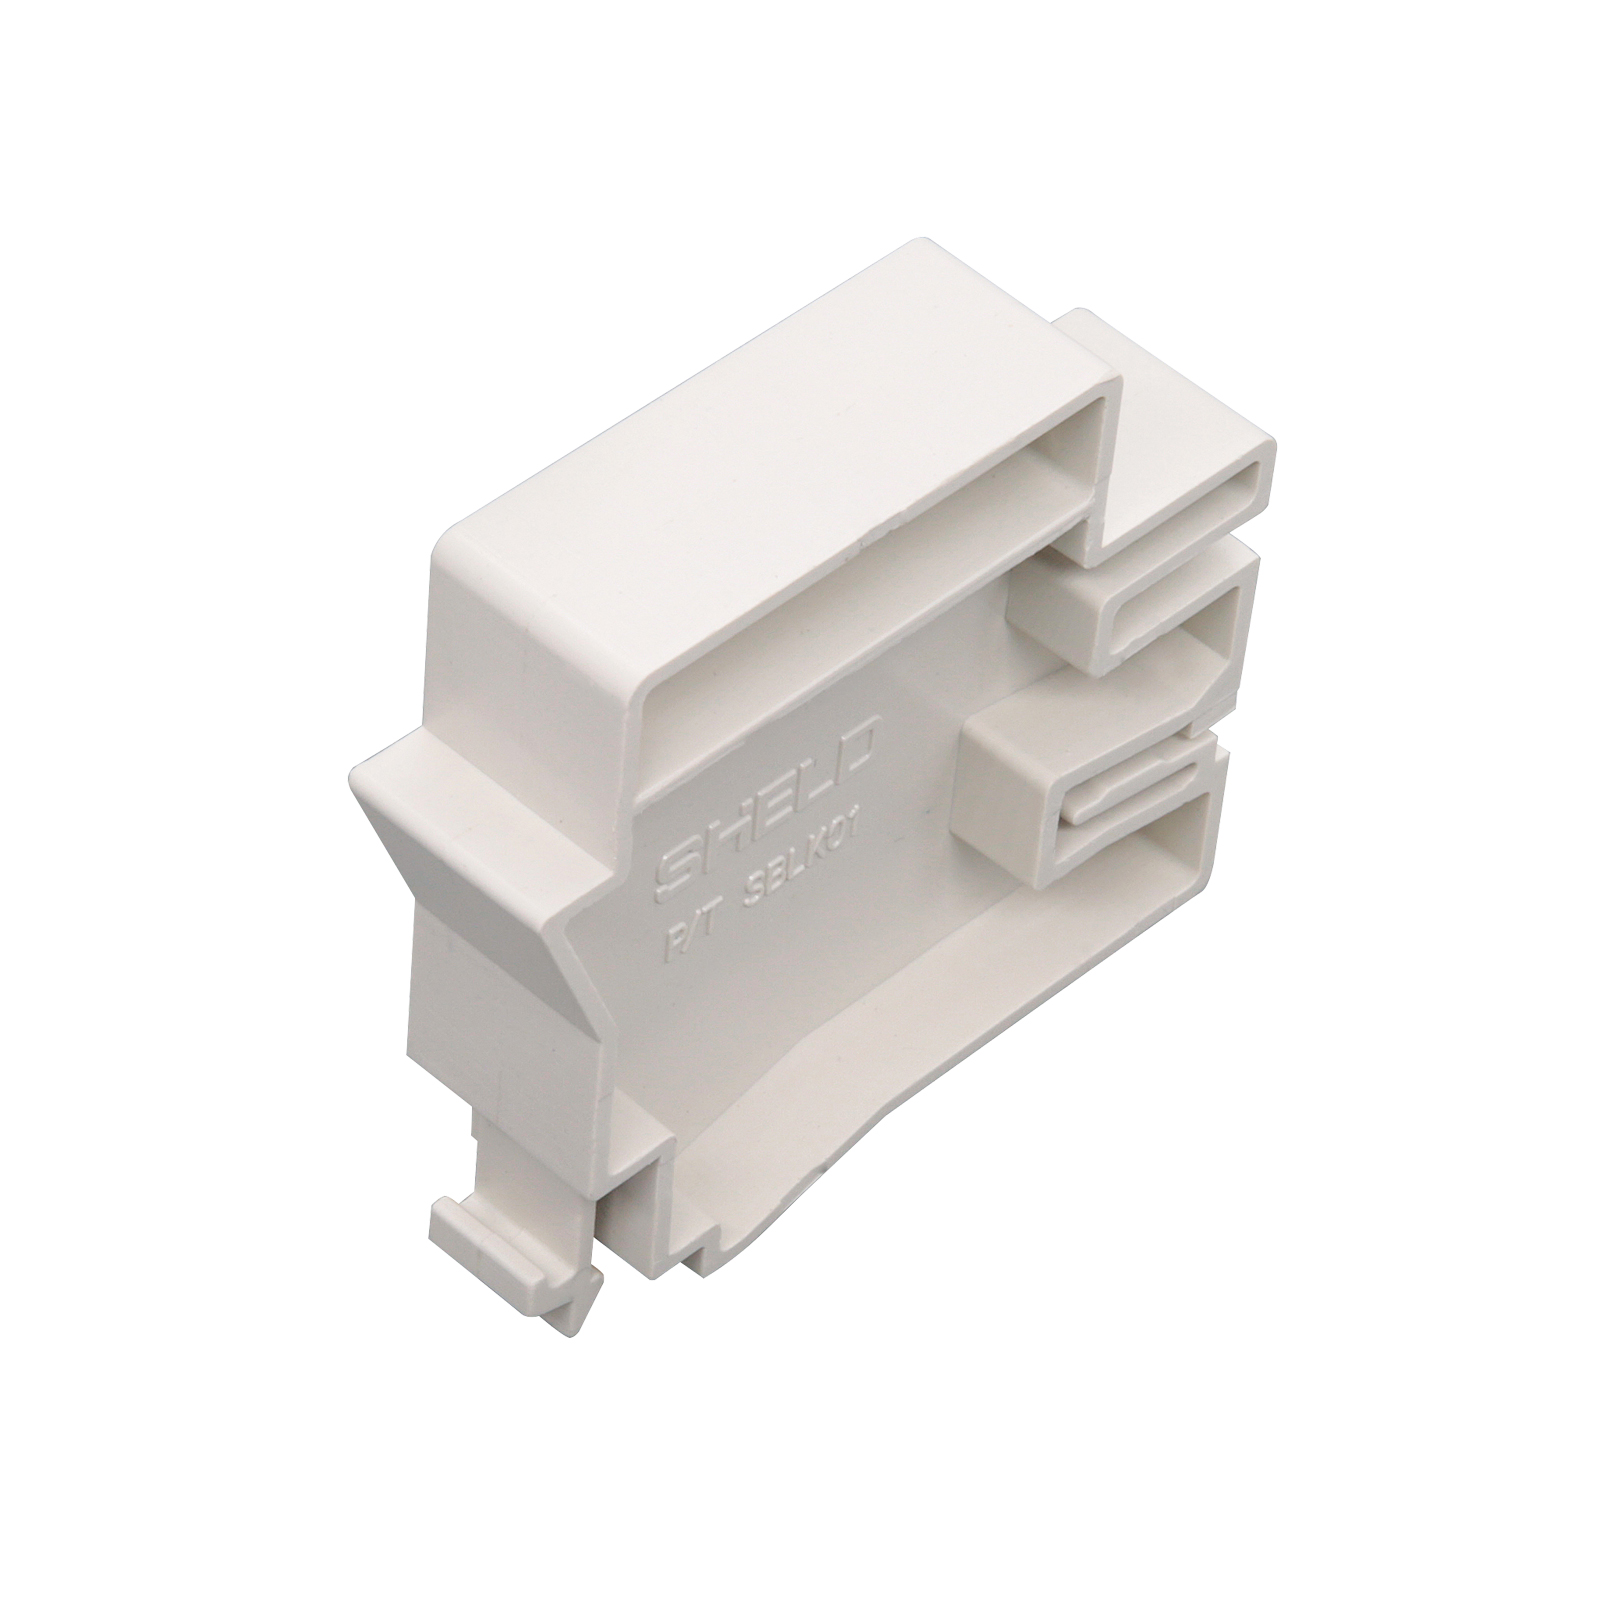 Chint Din Rail Mounted Blank